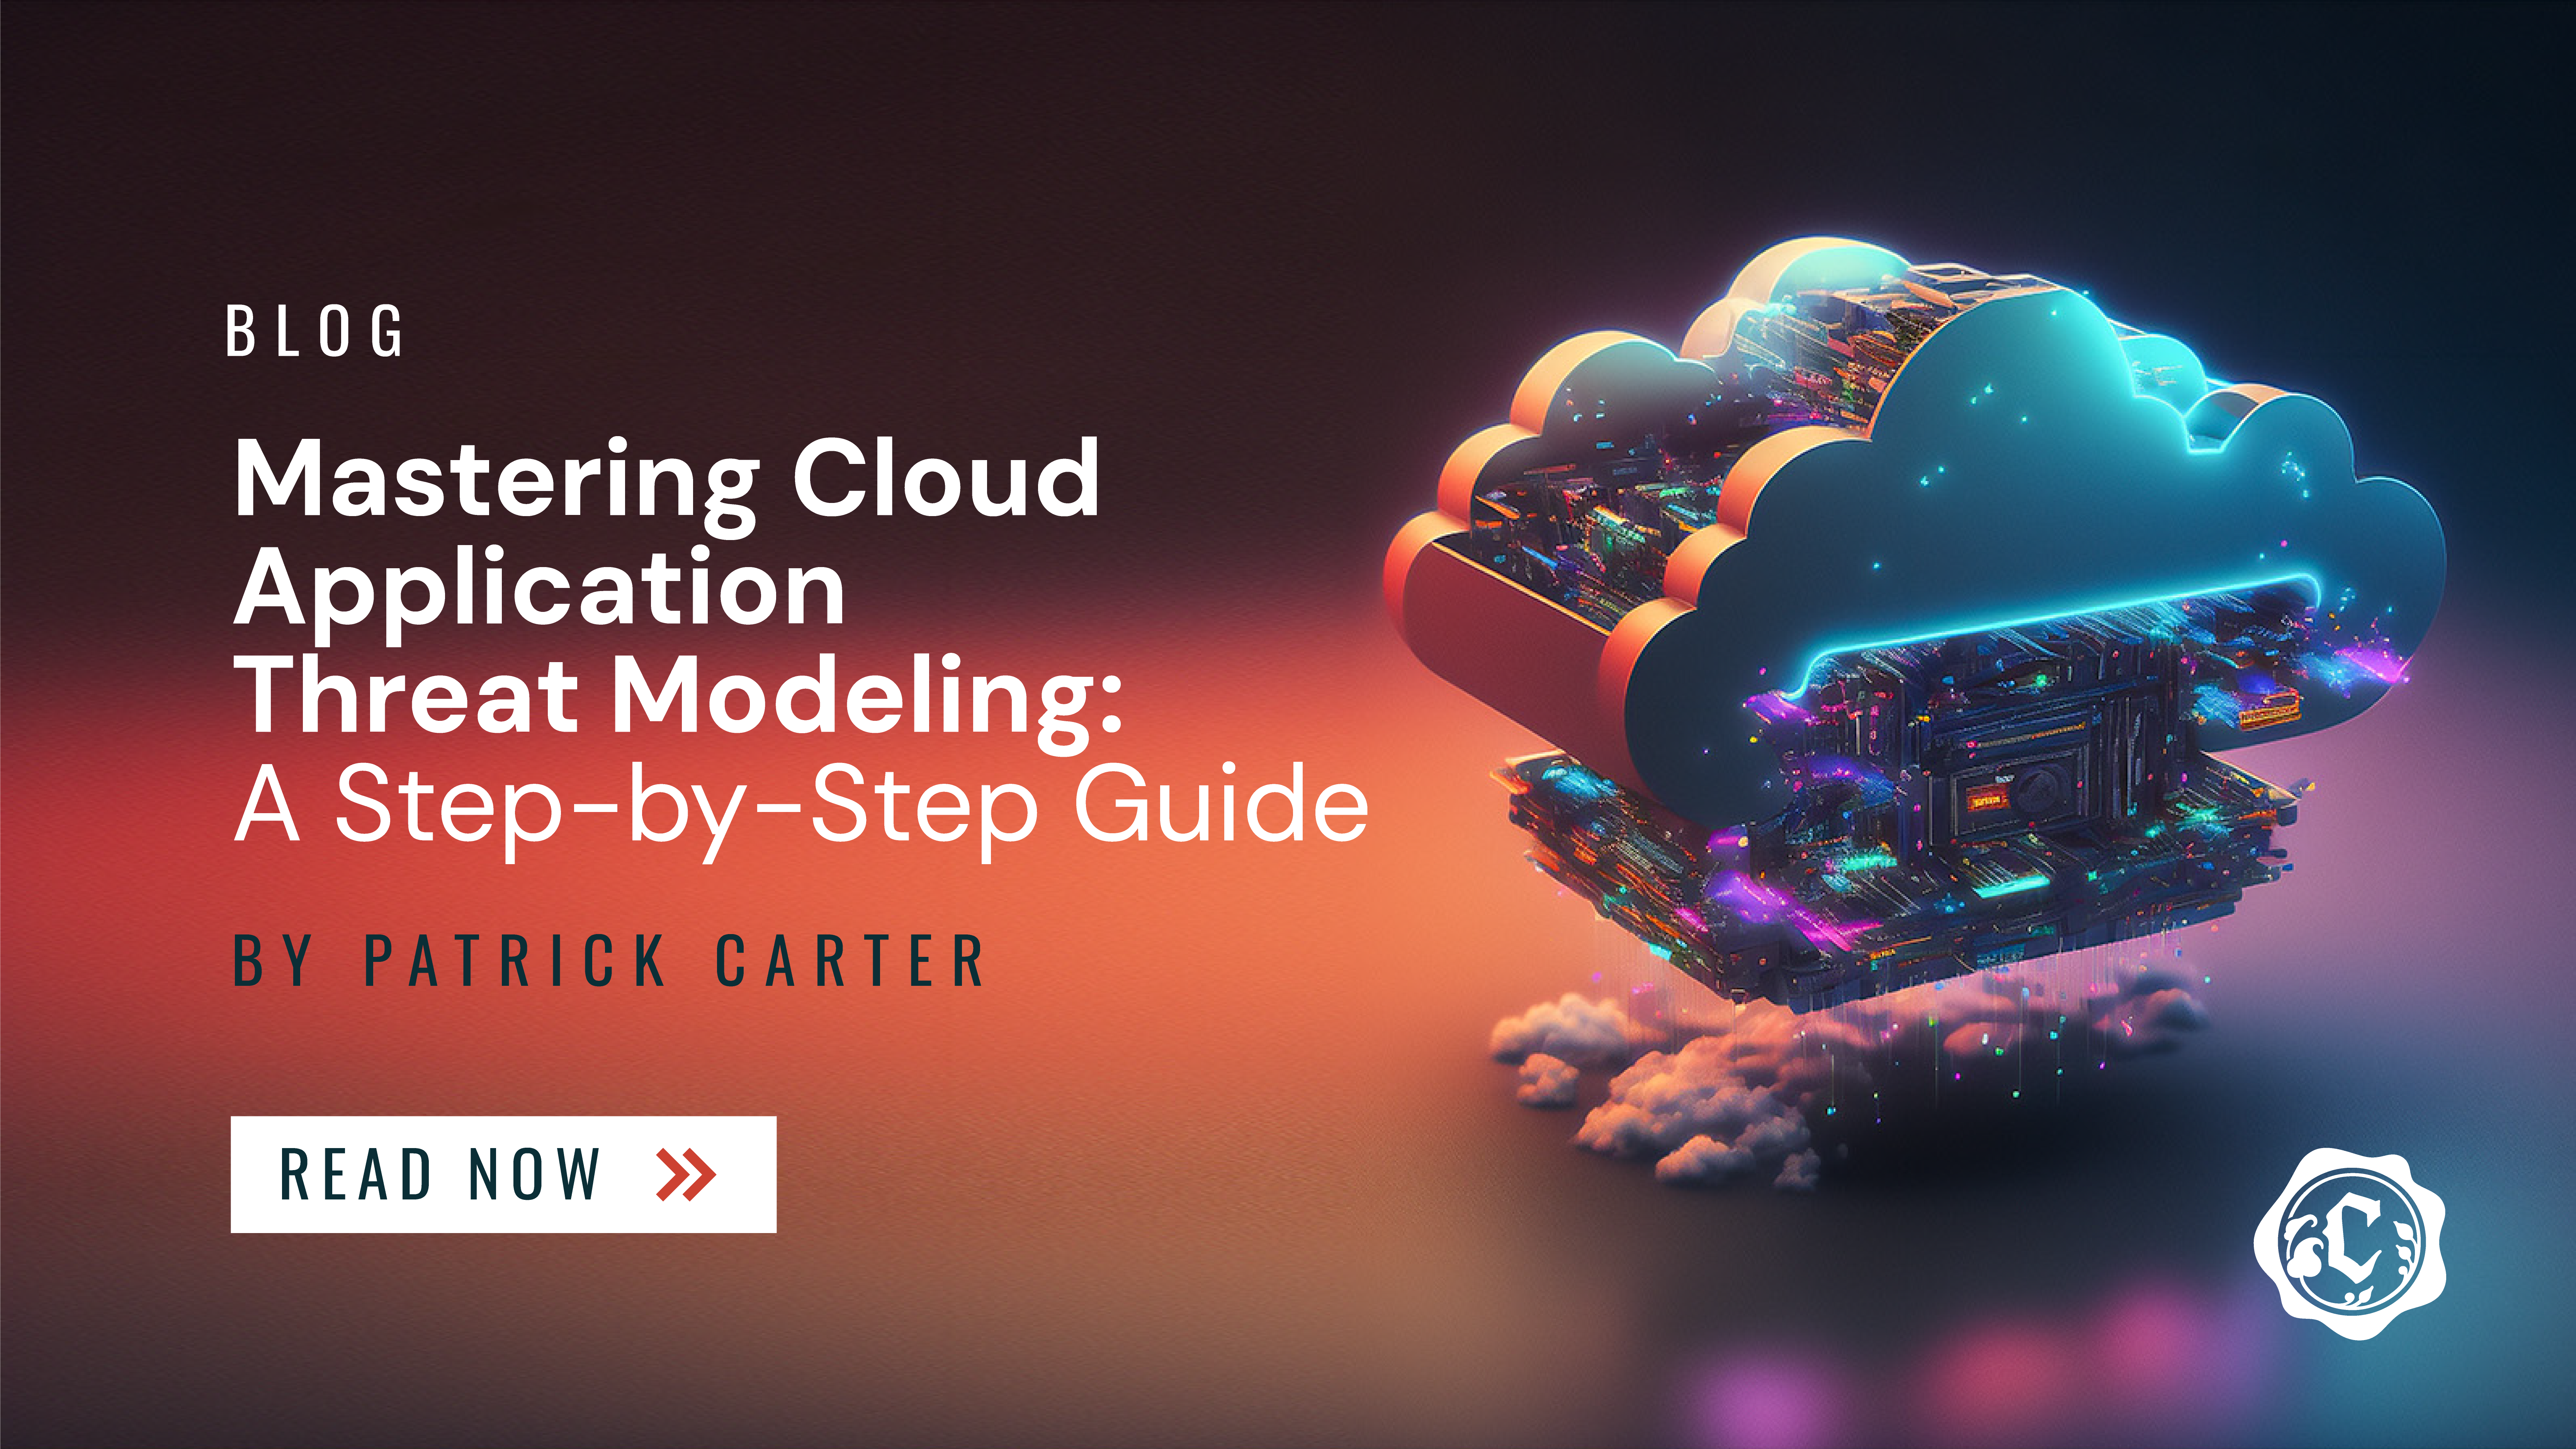 Mastering Cloud Application Threat Modeling: A Step-by-Step Guide